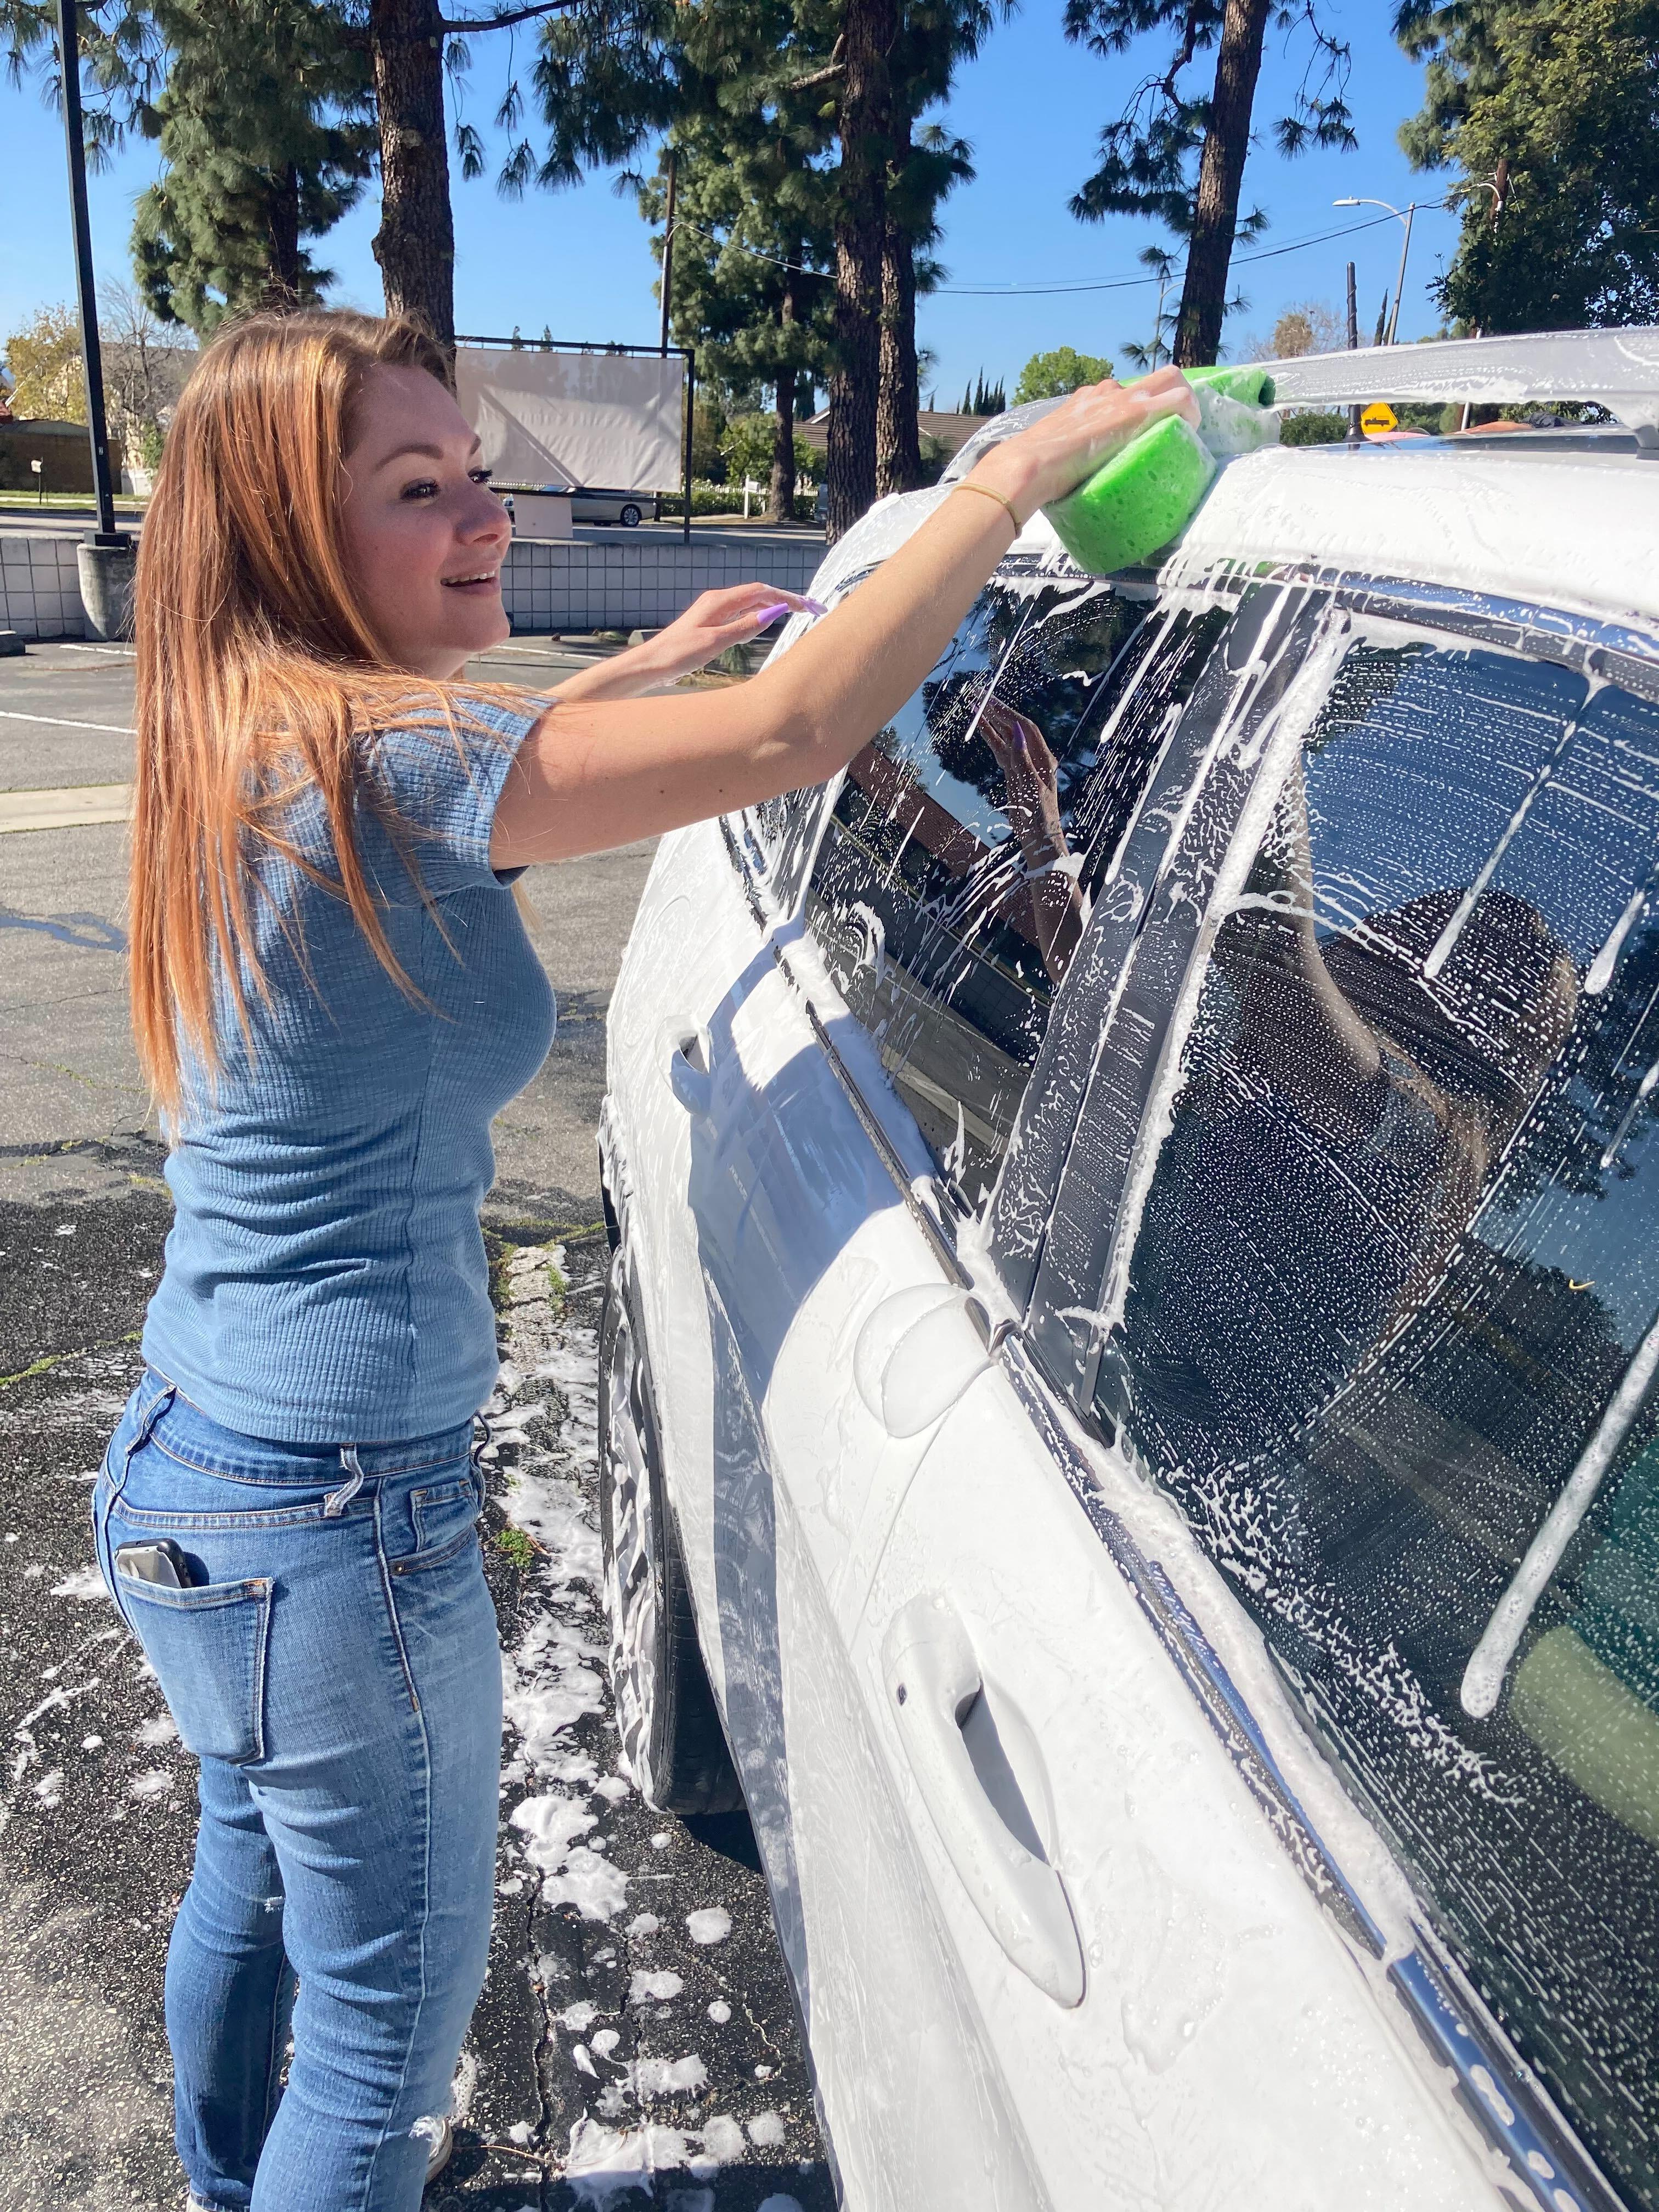 Ms. M washes a car